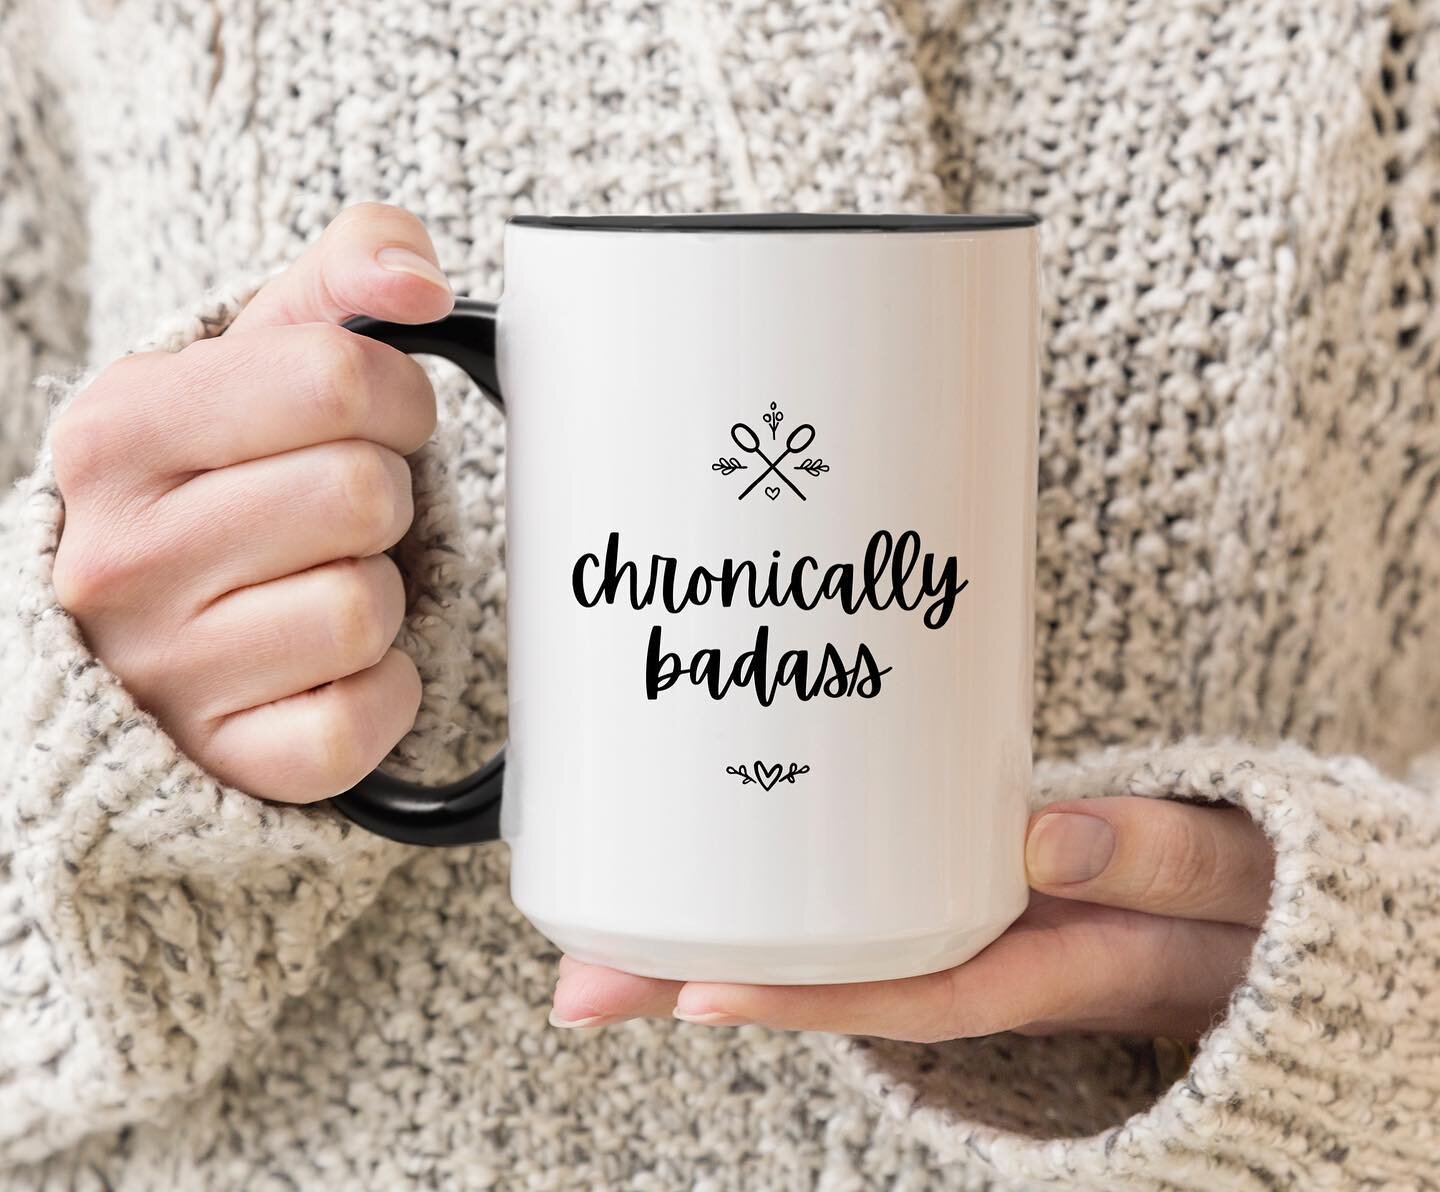 lil redesign of our chronically badass mug ✨ bc sometimes we just need that reminder!!!